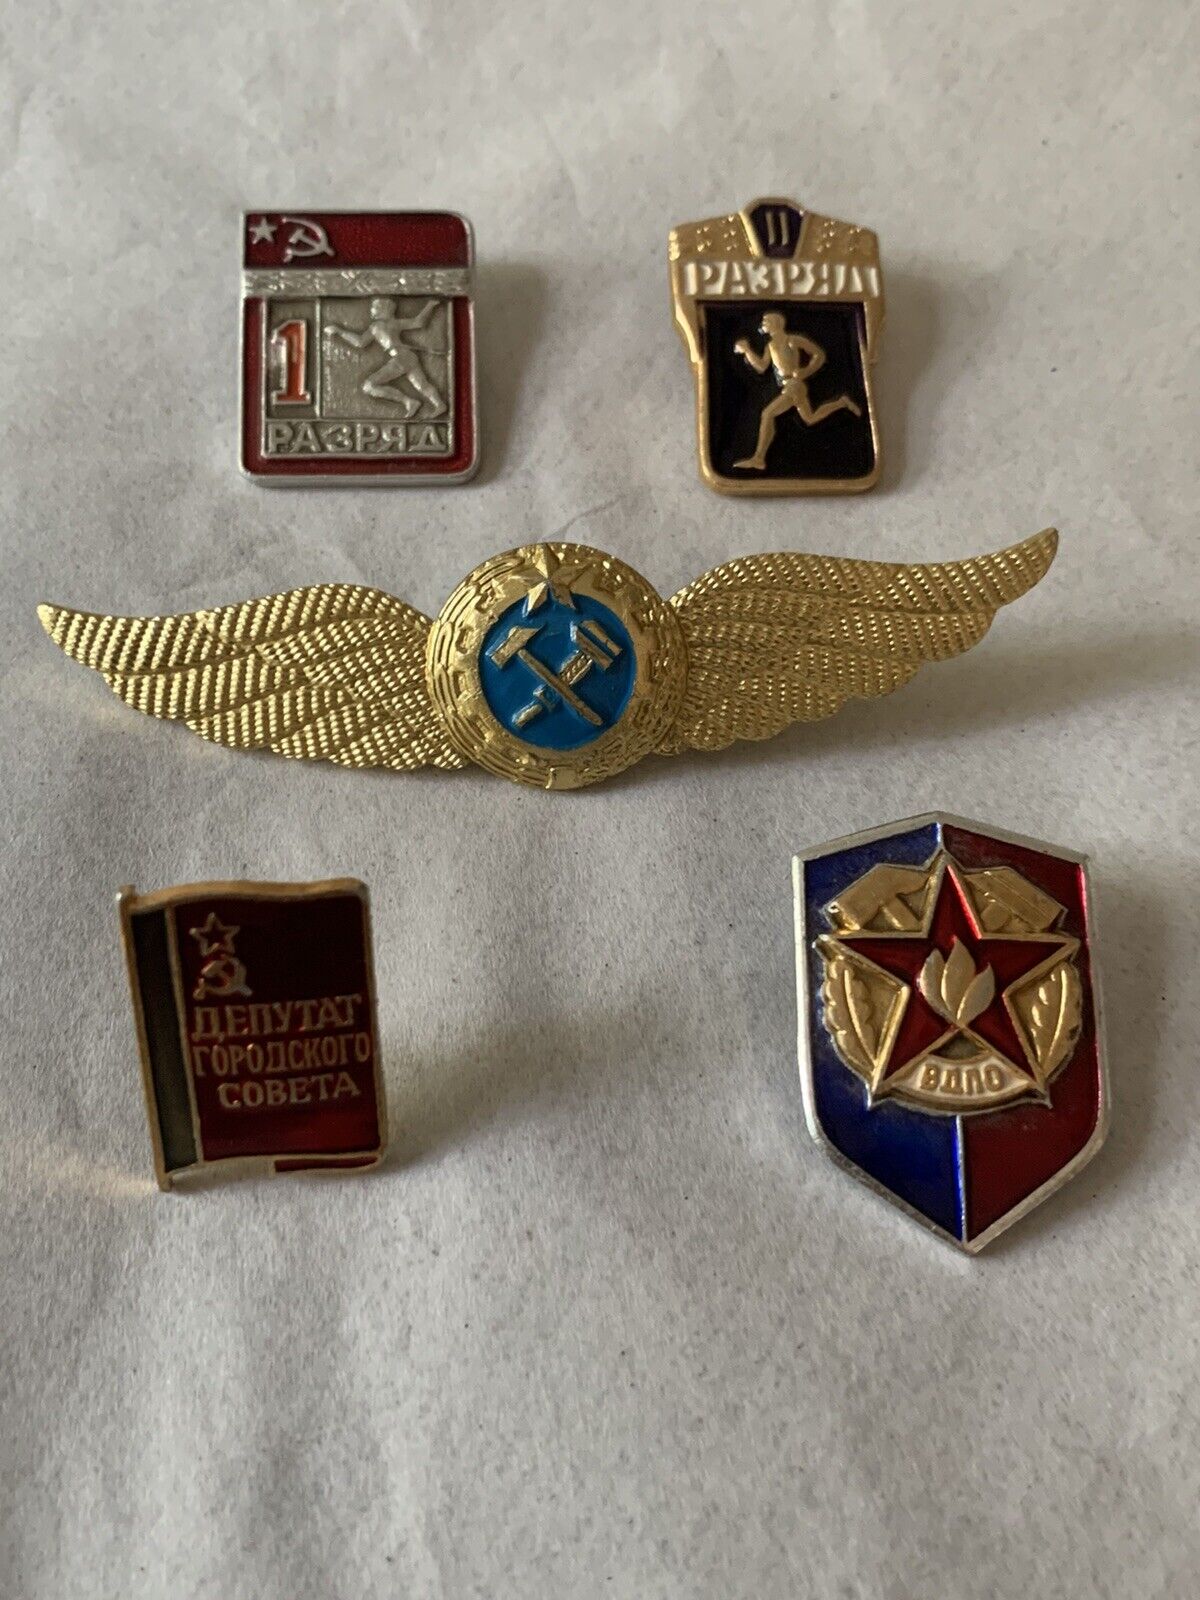 Lot of 5 Soviet Union USSR Workers Union Military Pins / Badges Russia Authentic